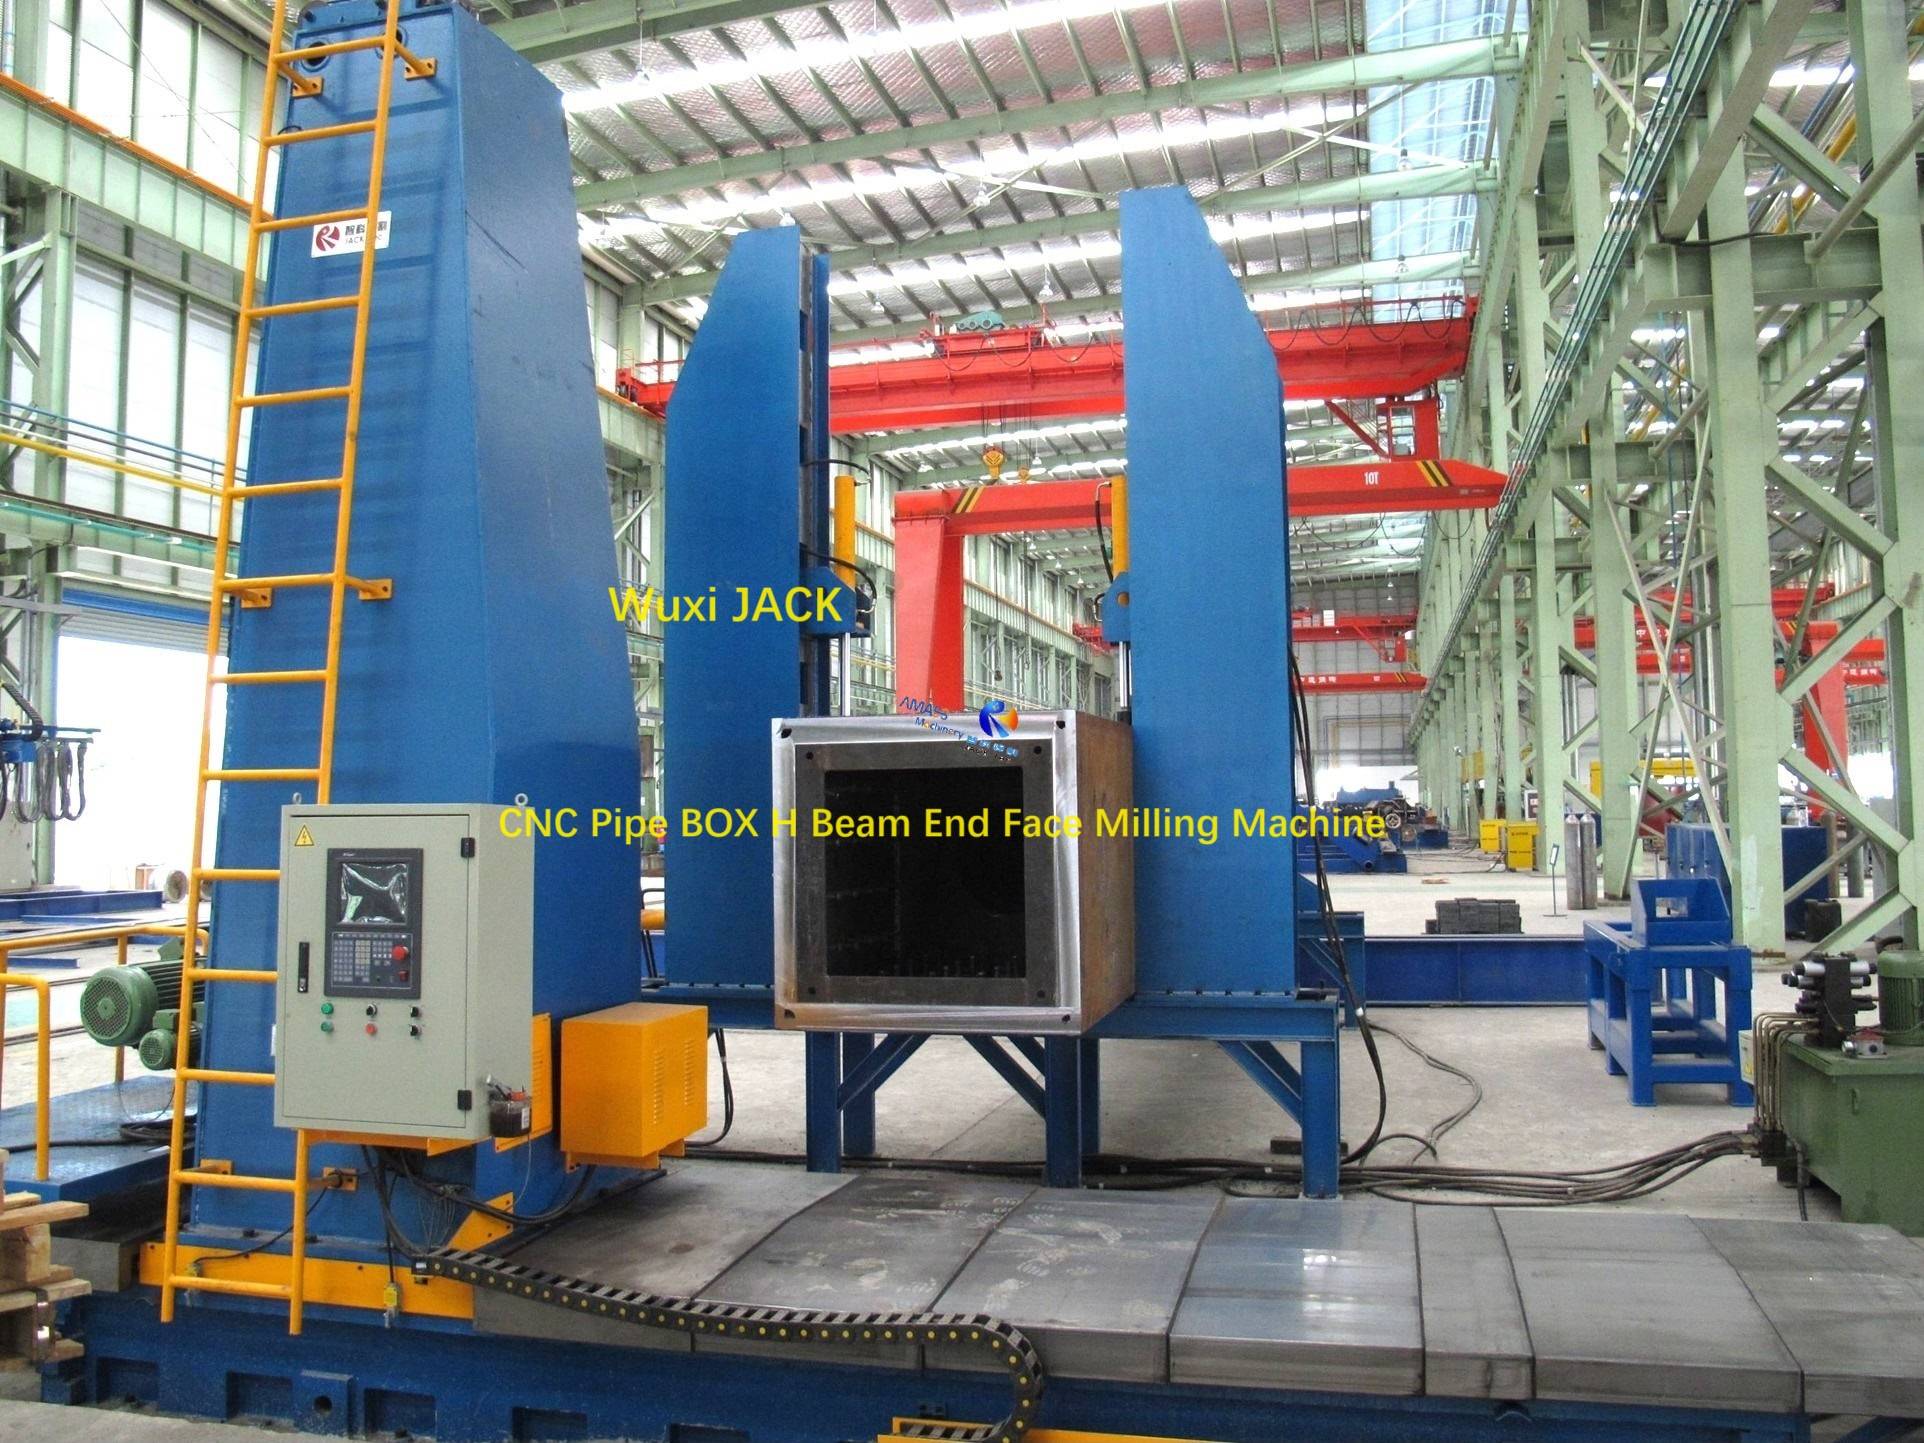 2 CNC Steel Structure Beam End Face Milling Machine 66